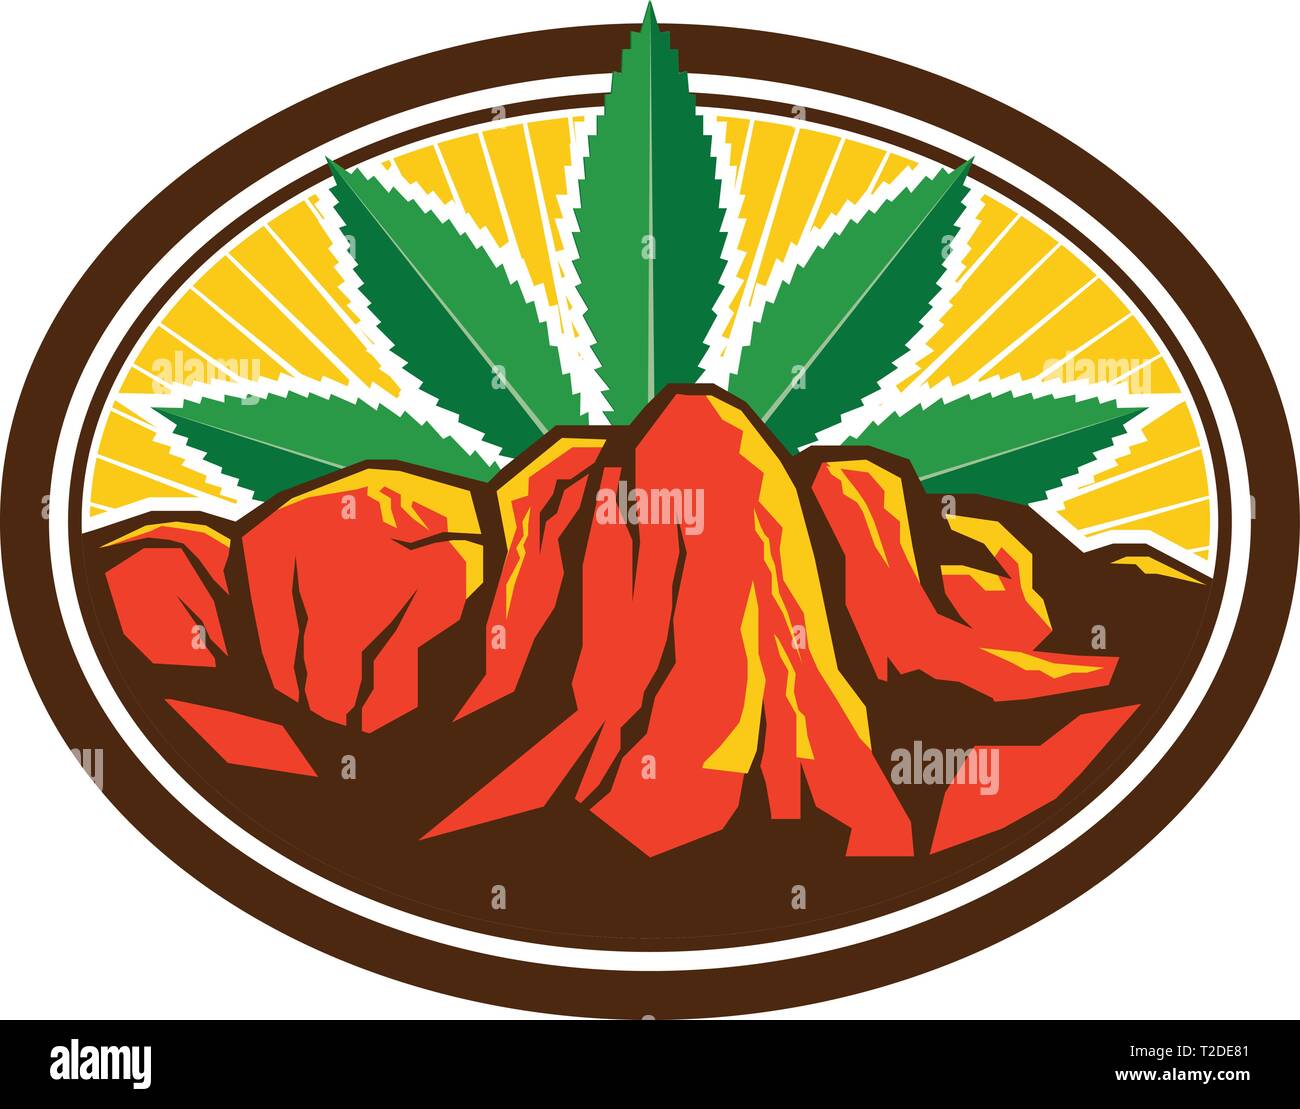 Retro style illustration of a red canyon and steep cliff with hemp leaf in background set inside oval shape on isolated background. Stock Vector